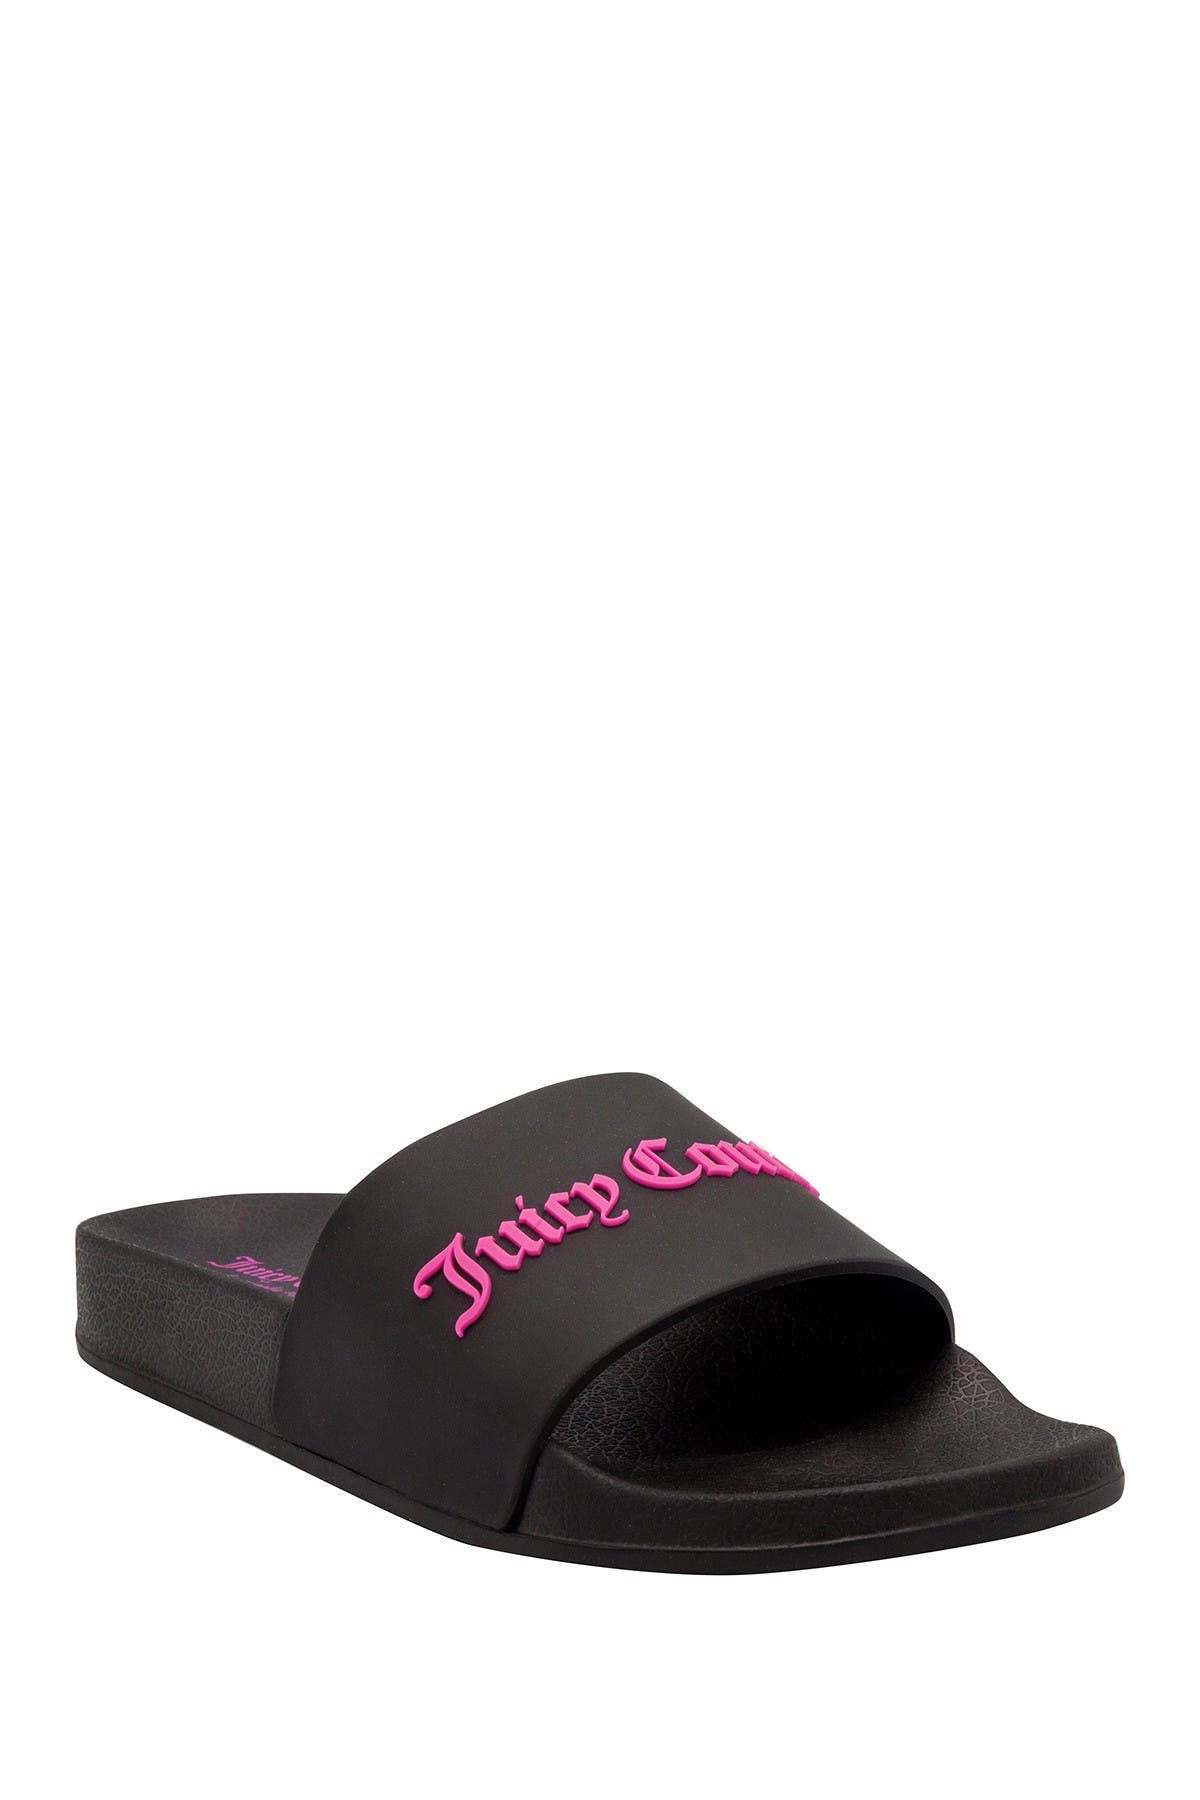 JUICY COUTURE WHIMSEY LOGO SLIDE,193605344300